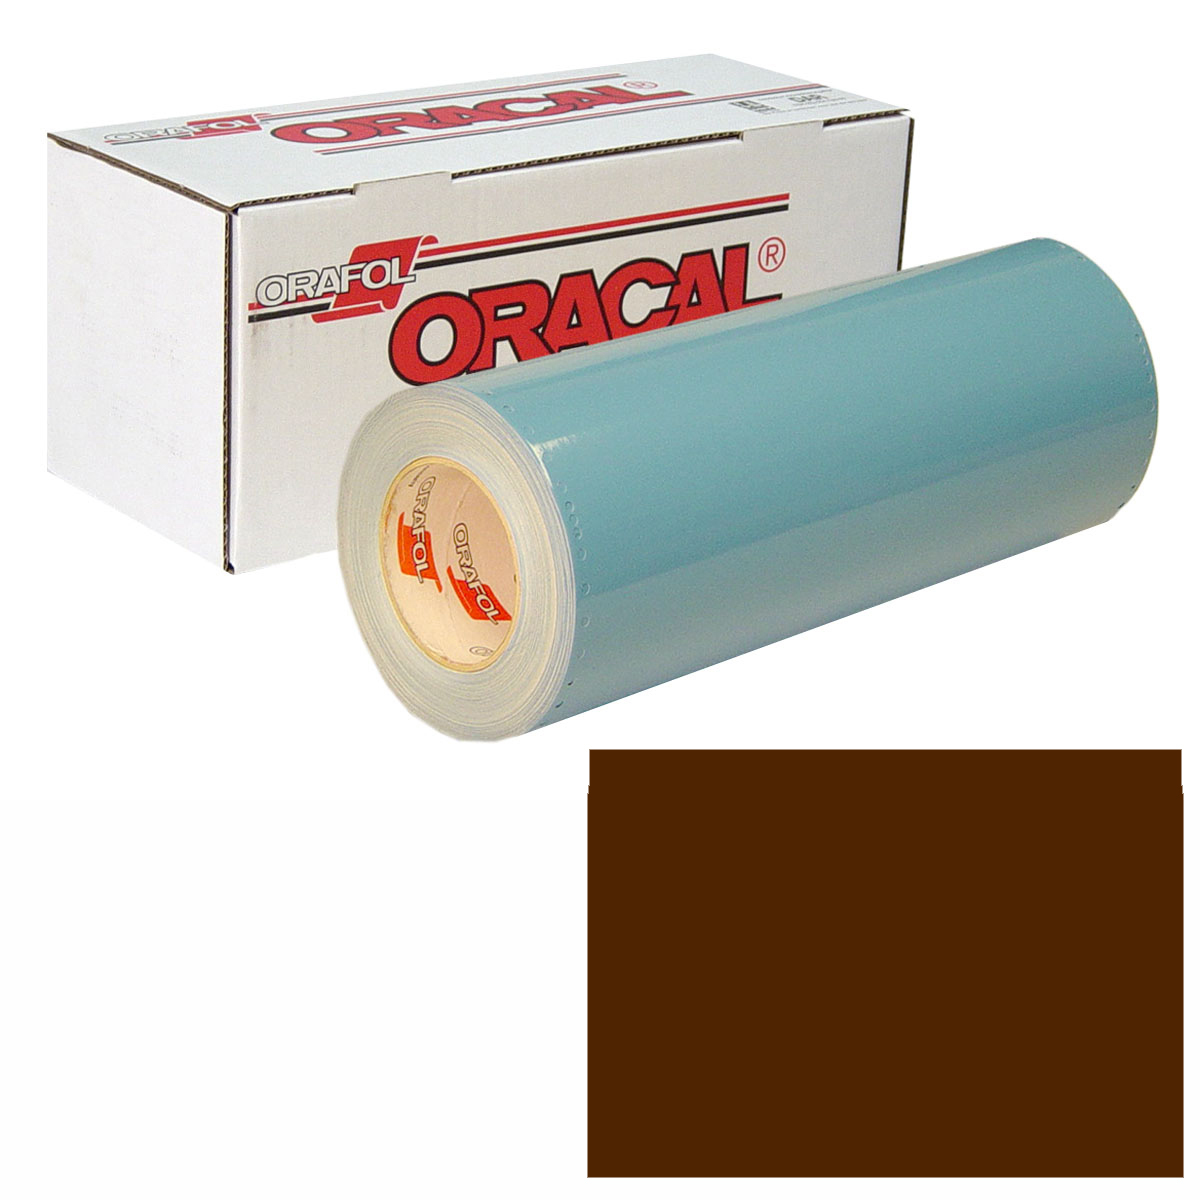 ORACAL 751 15in X 50yd 080 Brown